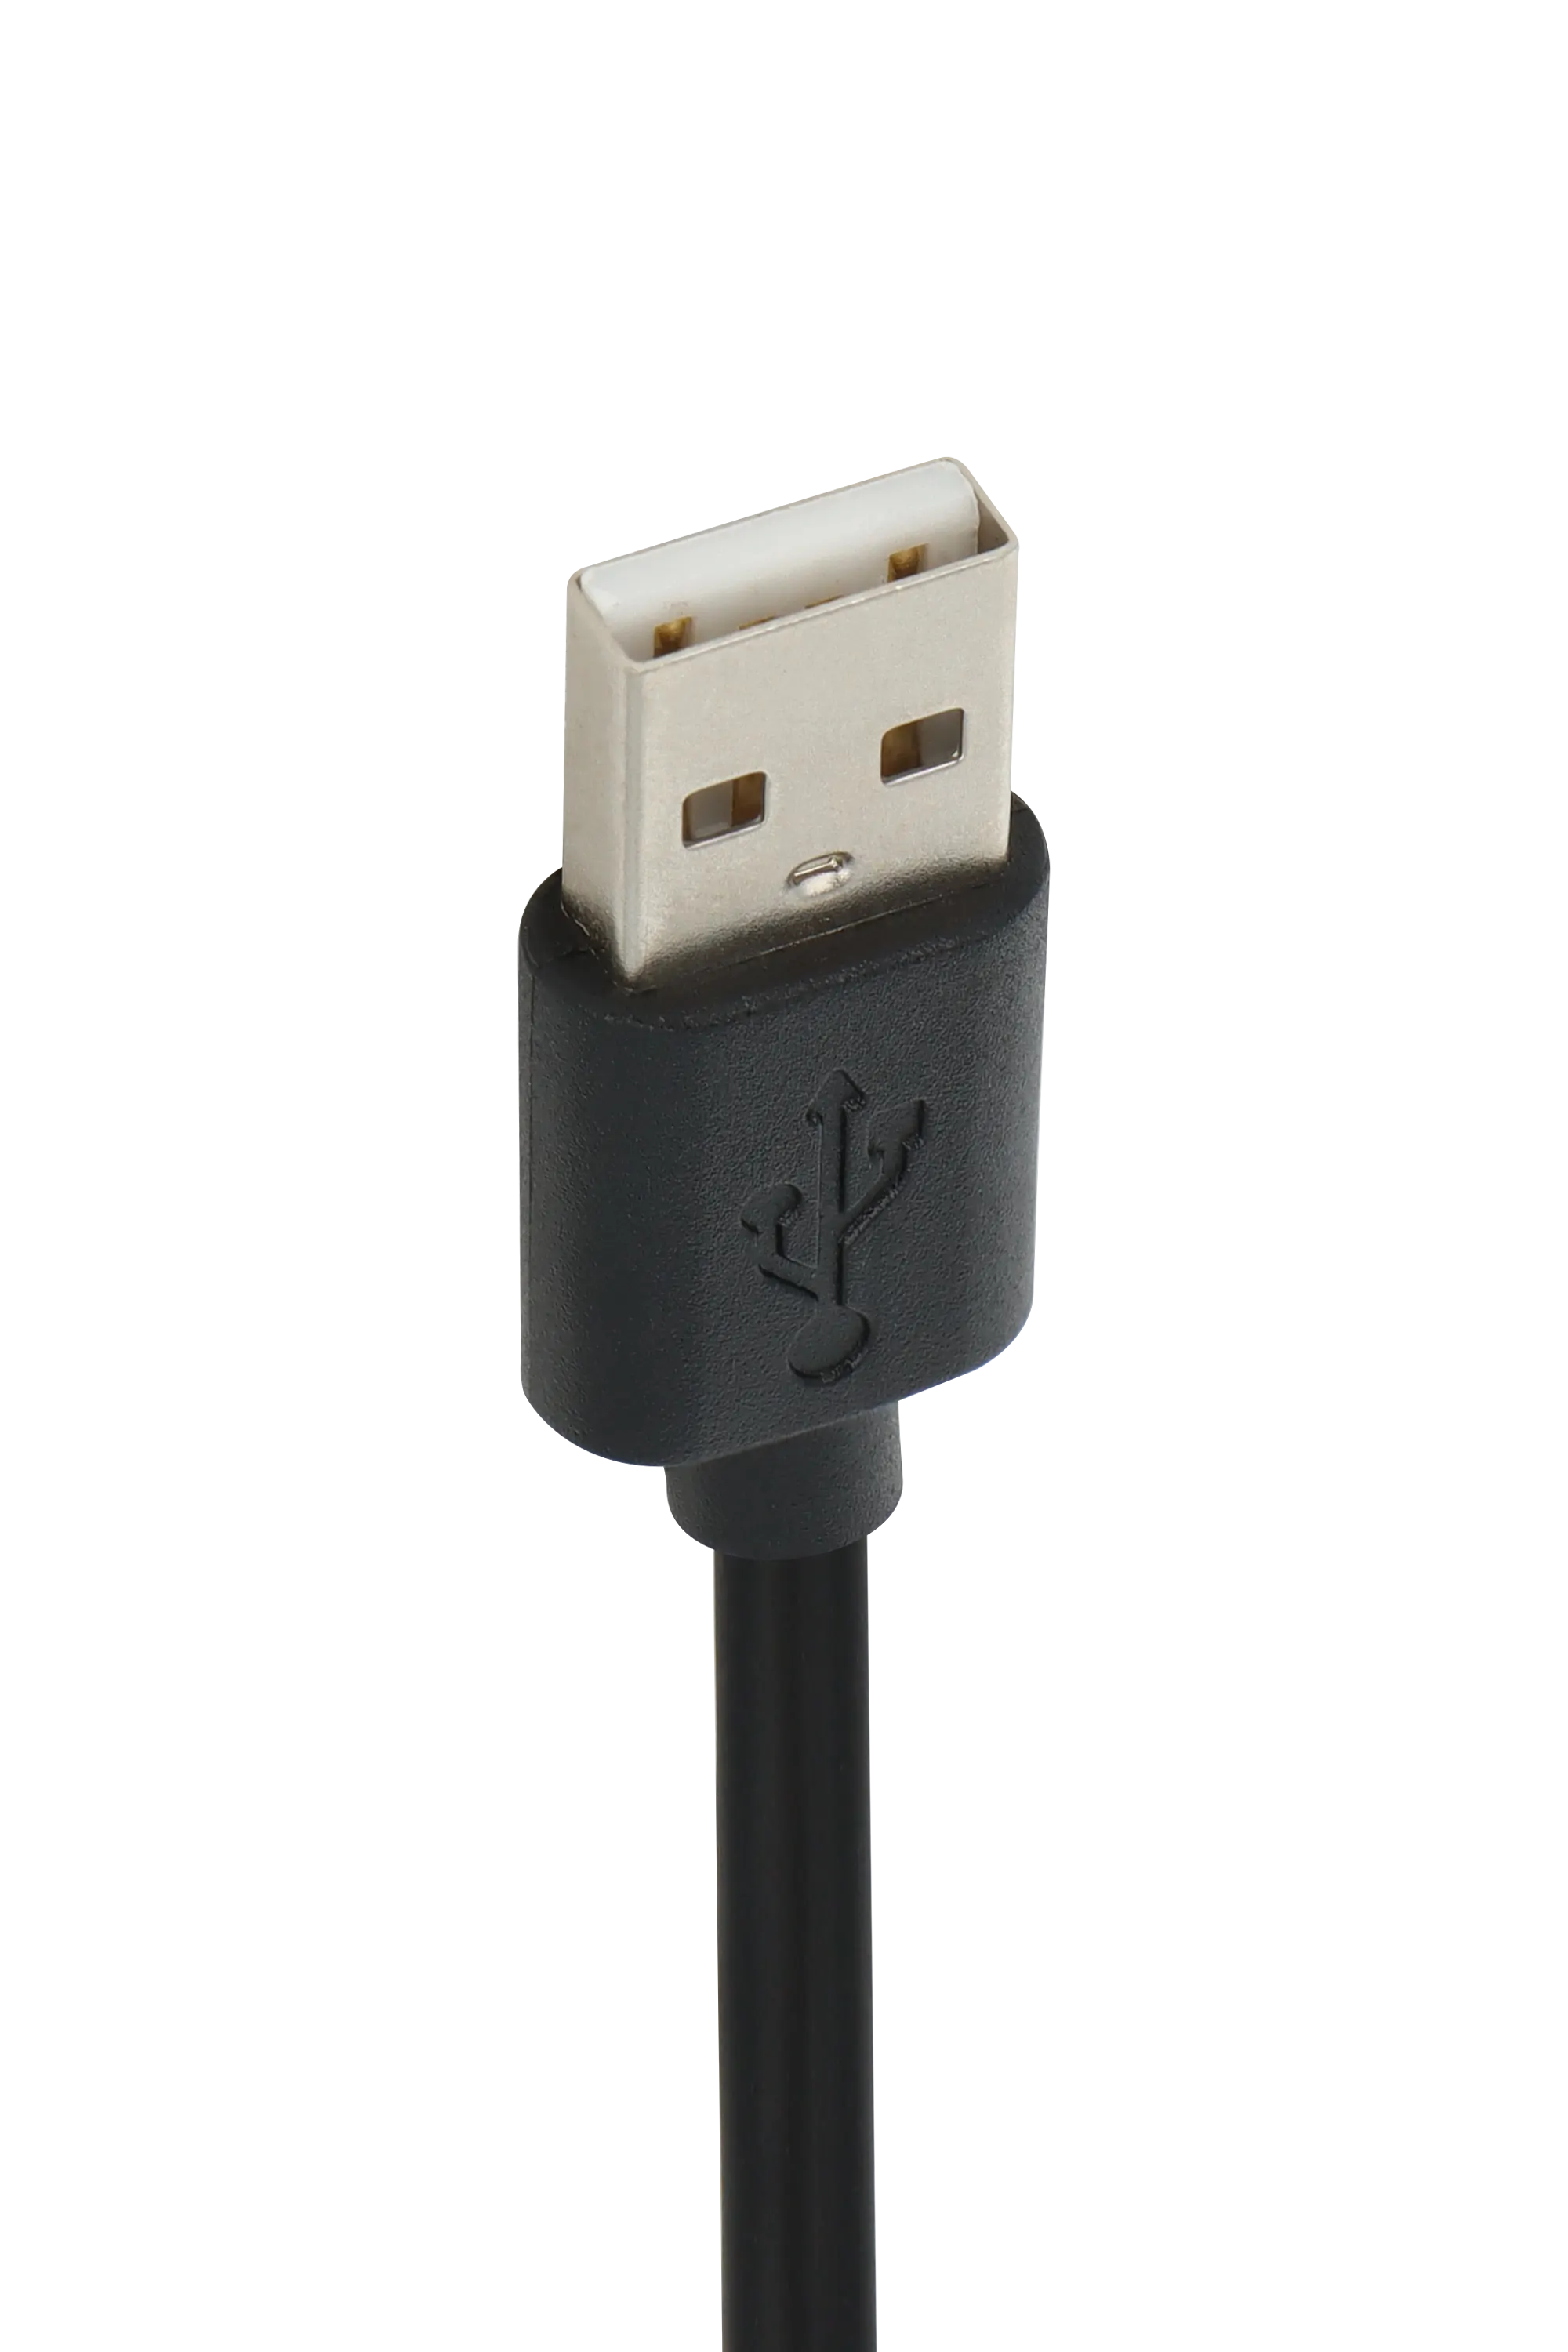 Usb: USB Type-A vs Type-C: Differences beyond the design - Times